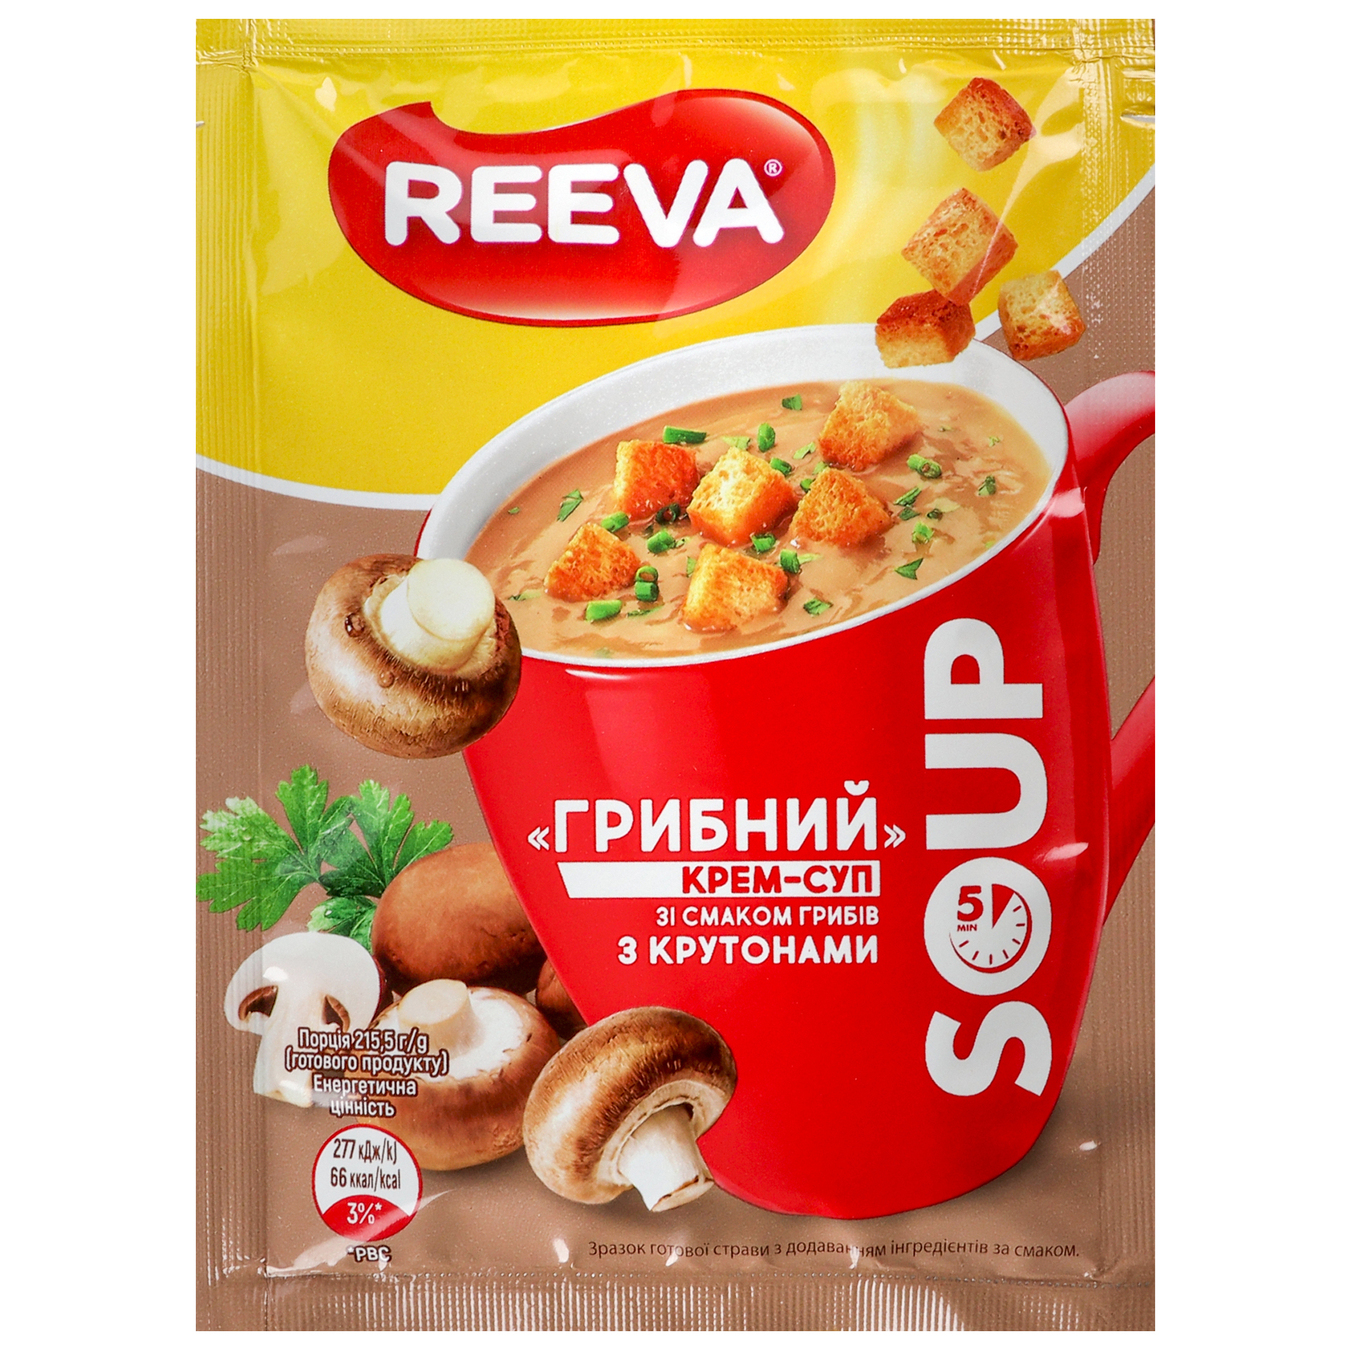 Reeva mushroom-flavored cream soup with croutons 15.5g